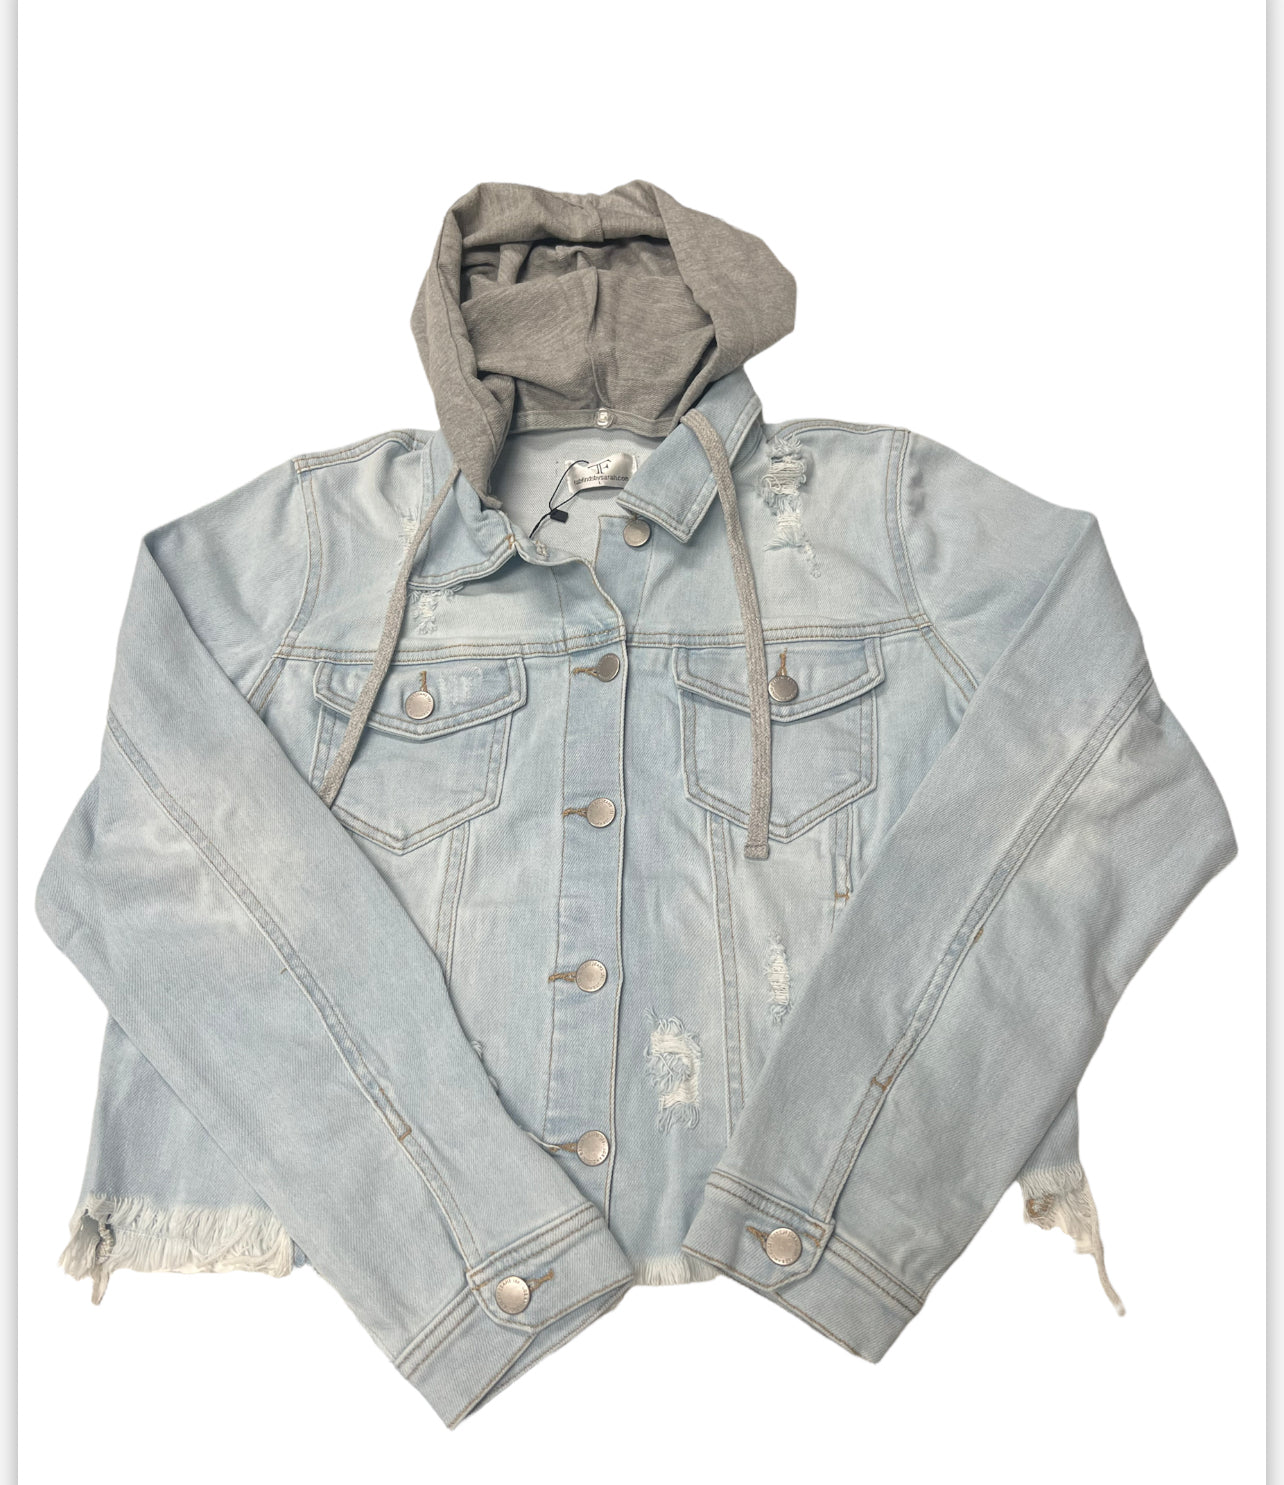 Collab Hooded “Charmed Middy” on Light Wash Denim Jacket